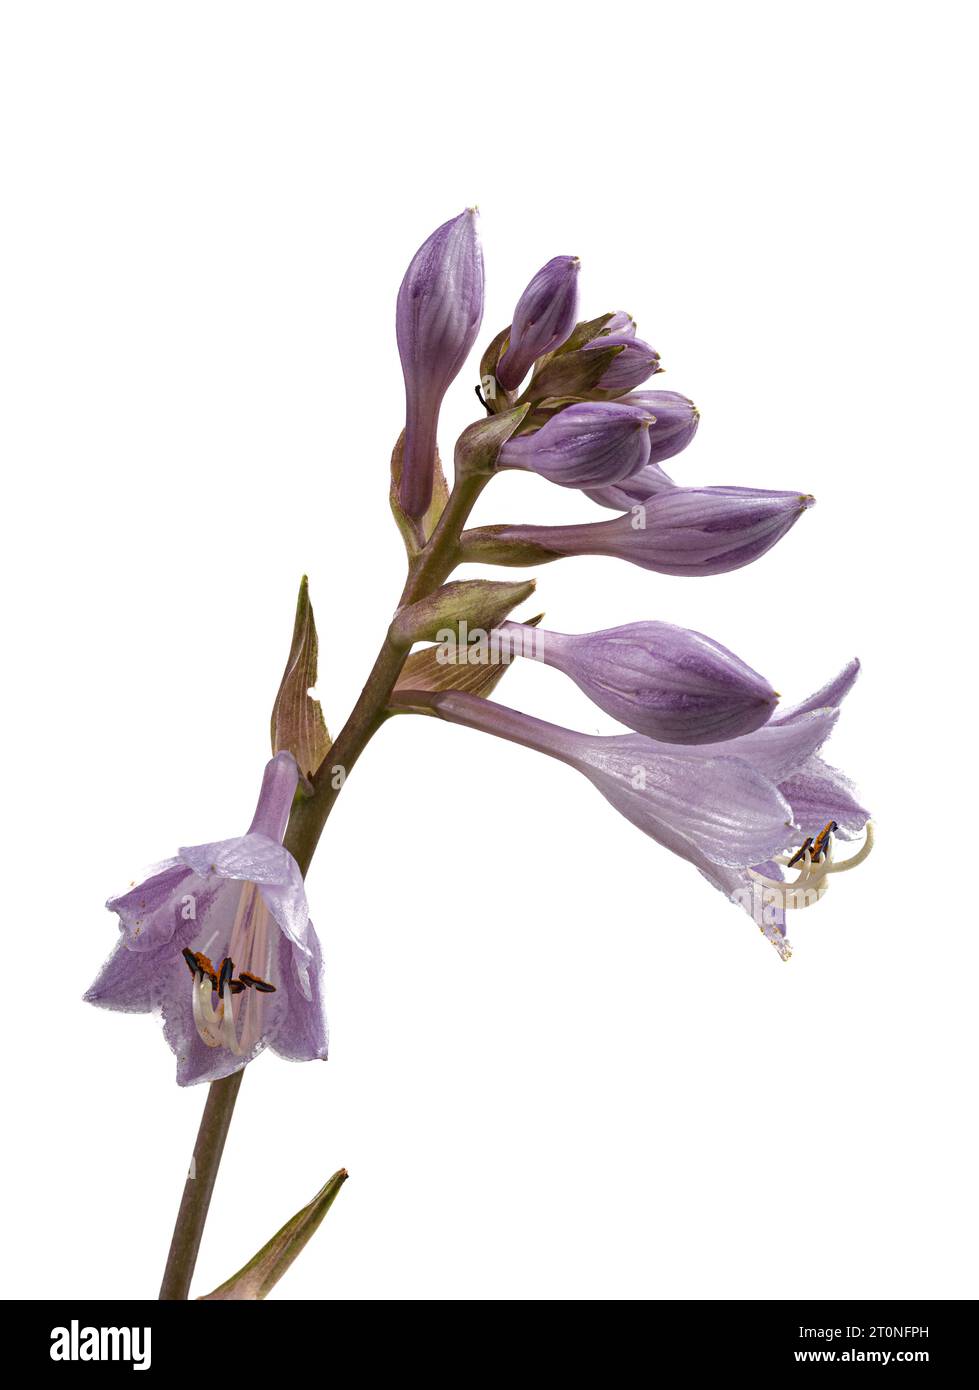 Lilac lily flowers of the hardy perennial garden plant, Hosta 'June' against a white background Stock Photo